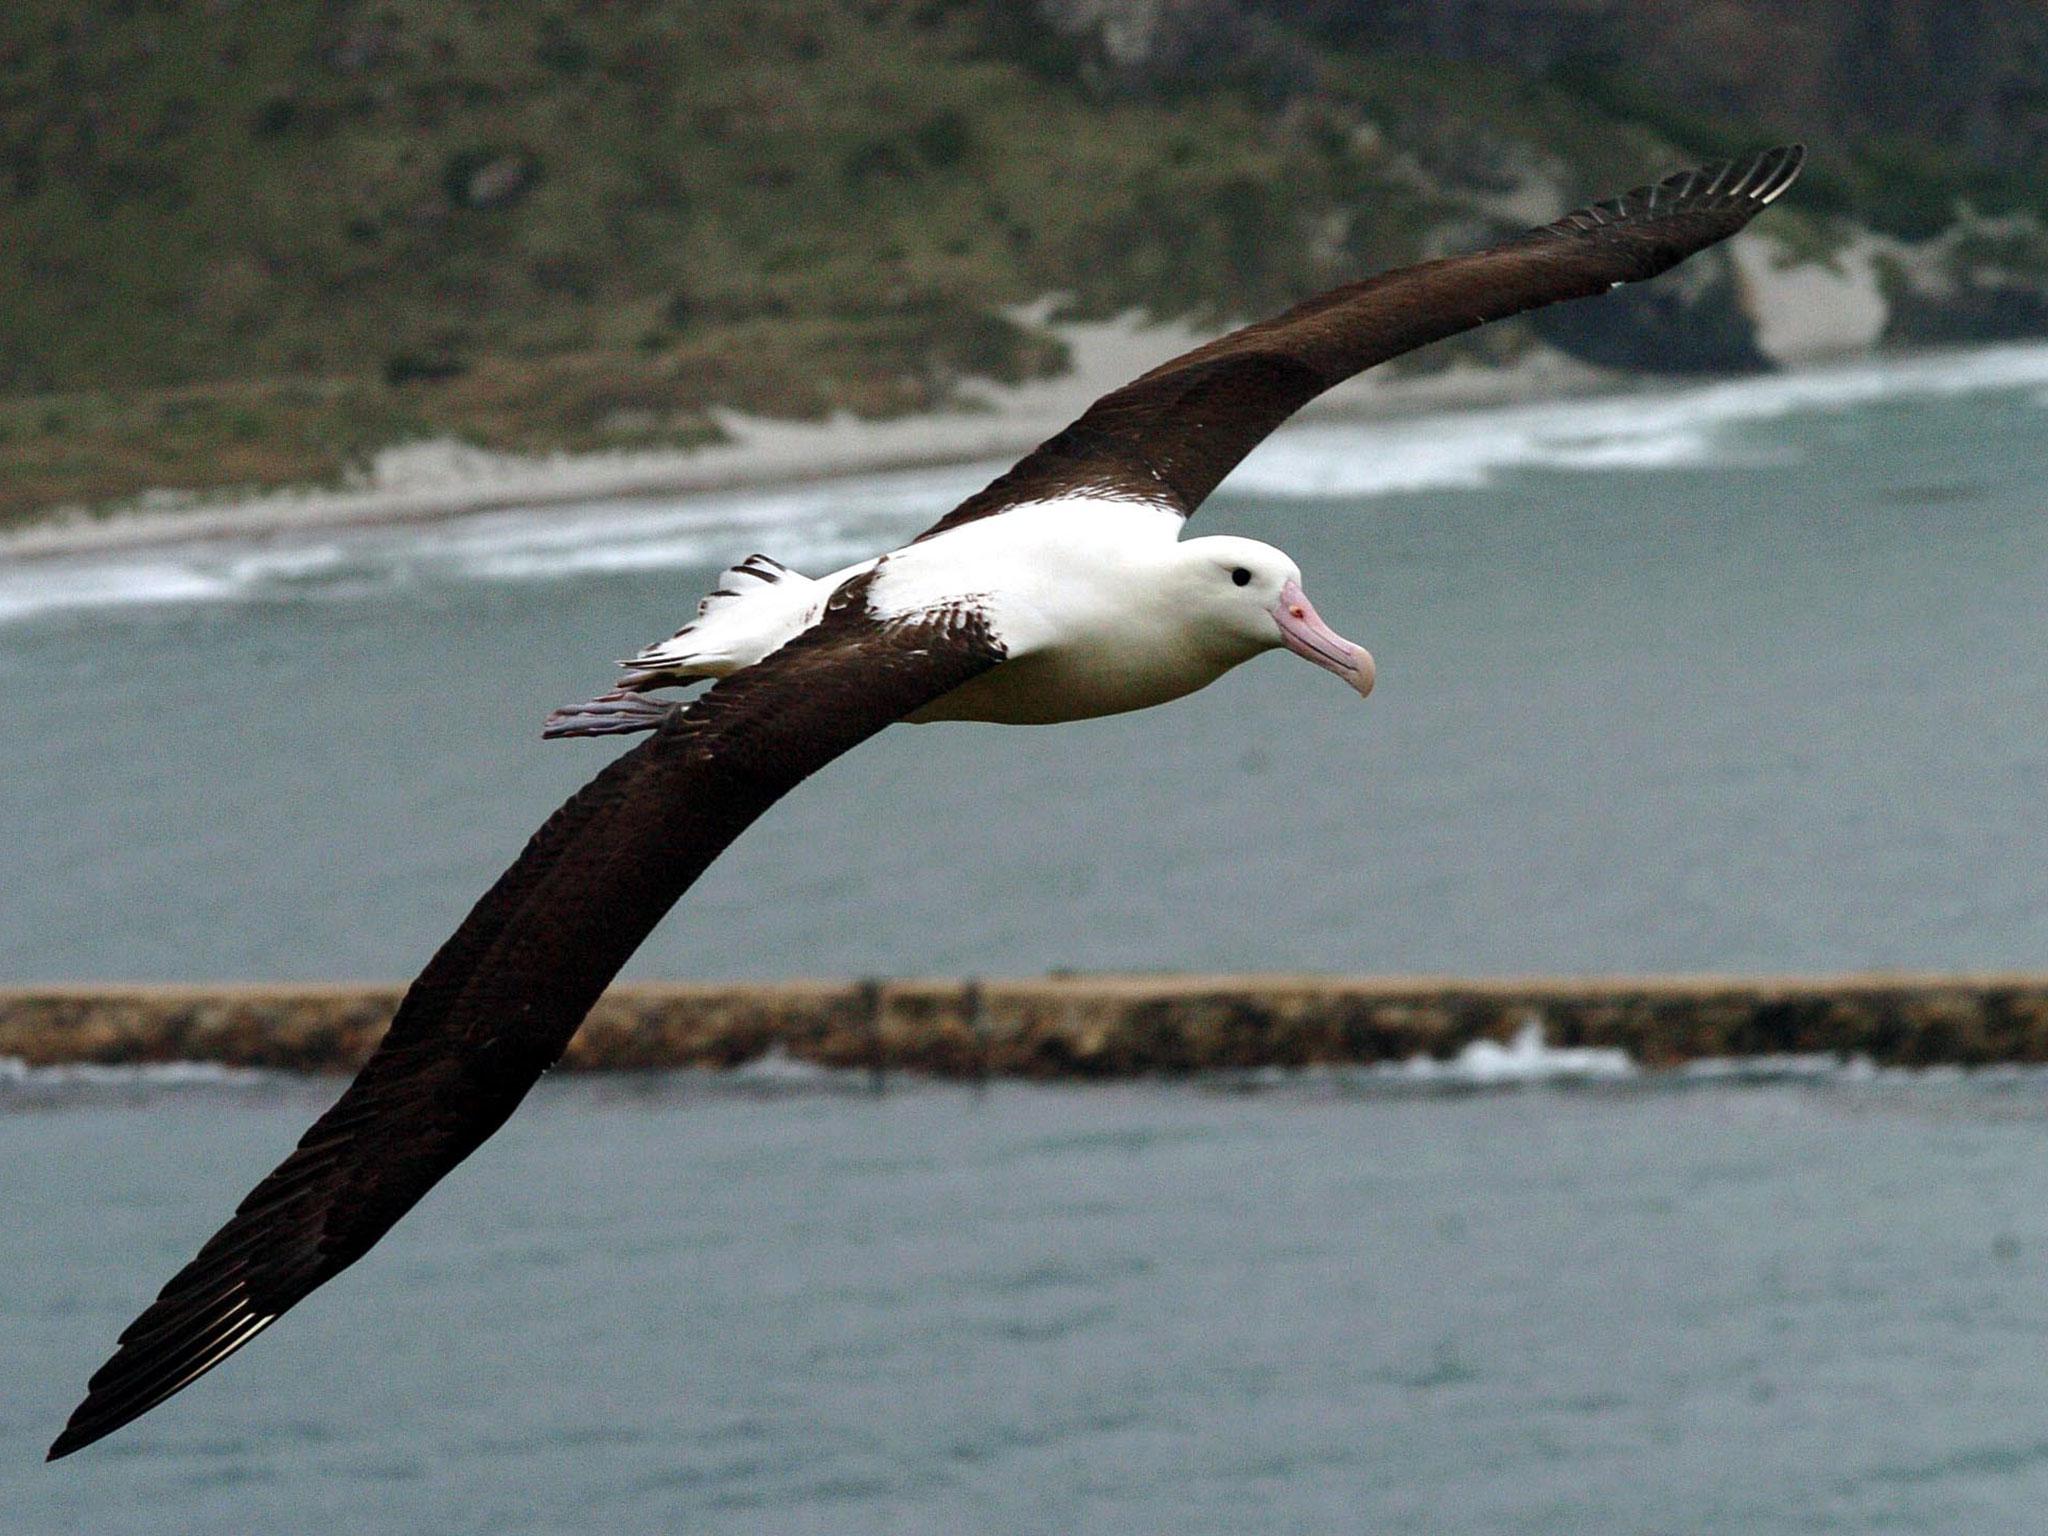 Northern Royal albatross numbers have declined on New Zealand's remote and inaccessible Chatham Islands